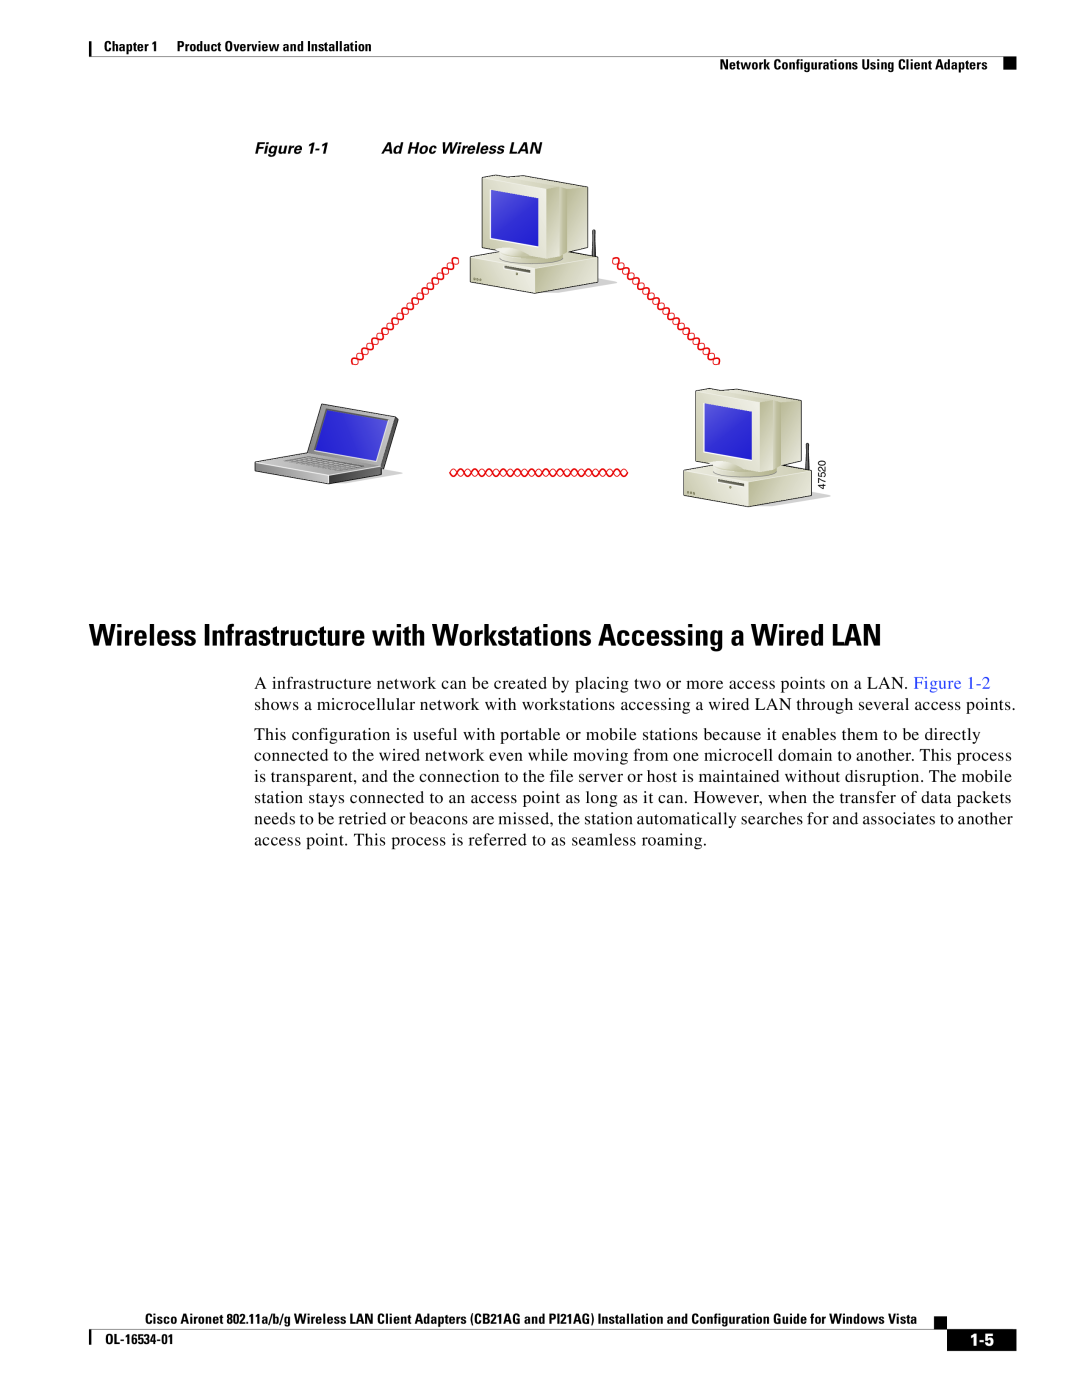 Cisco Systems CB21AG, PI21AG manual Wireless Infrastructure with Workstations Accessing a Wired LAN, 1 Ad Hoc Wireless LAN 